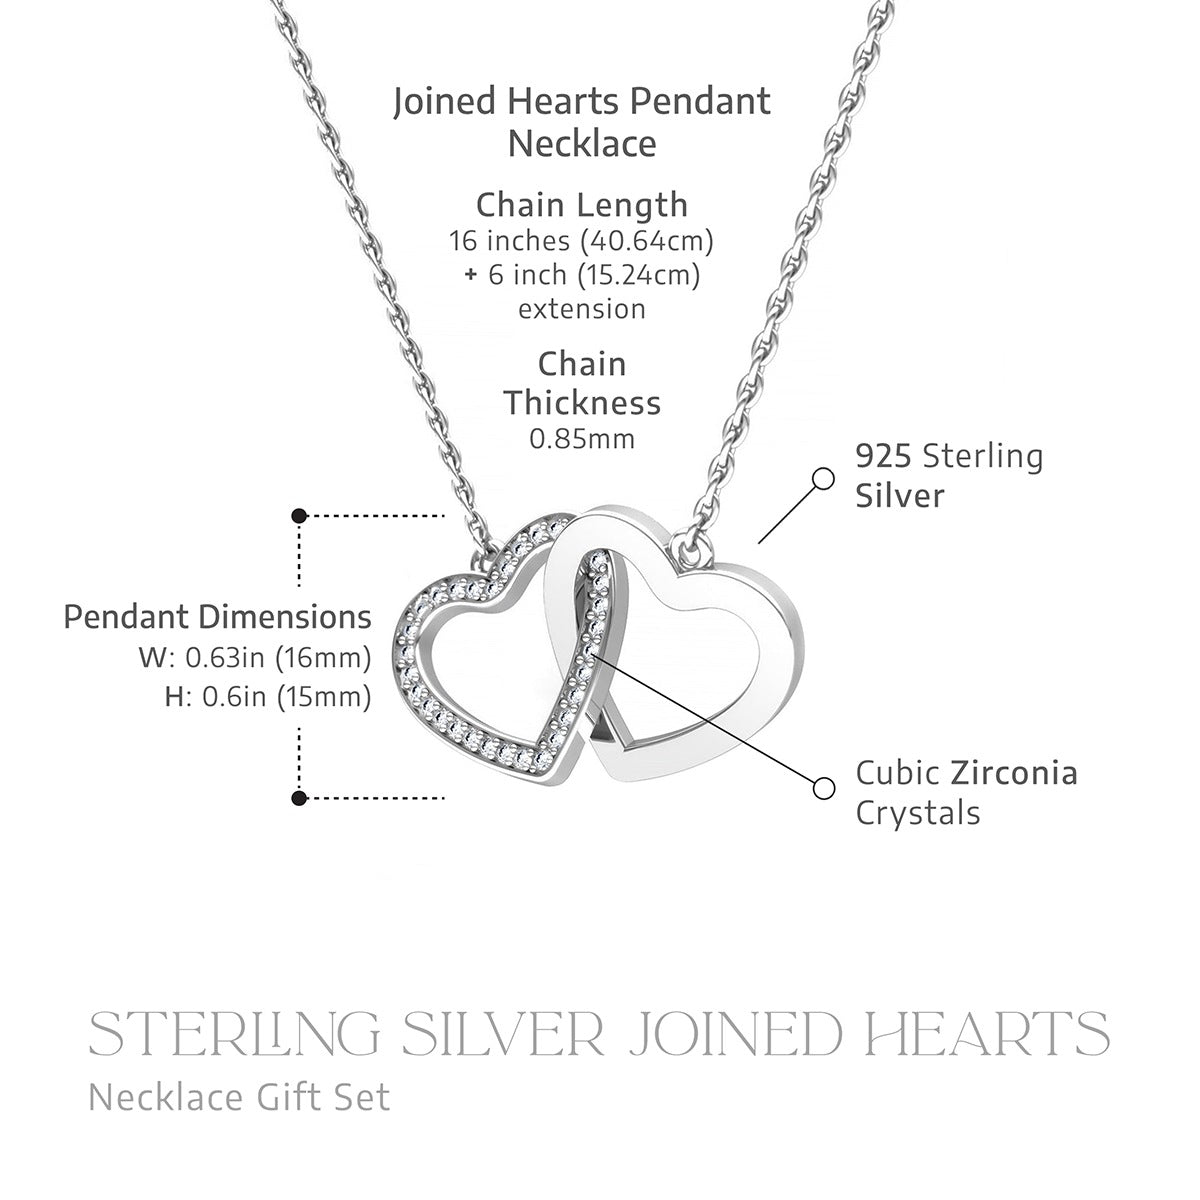 Soul Sister Noun - Sterling Silver Joined Hearts Necklace Gift Set